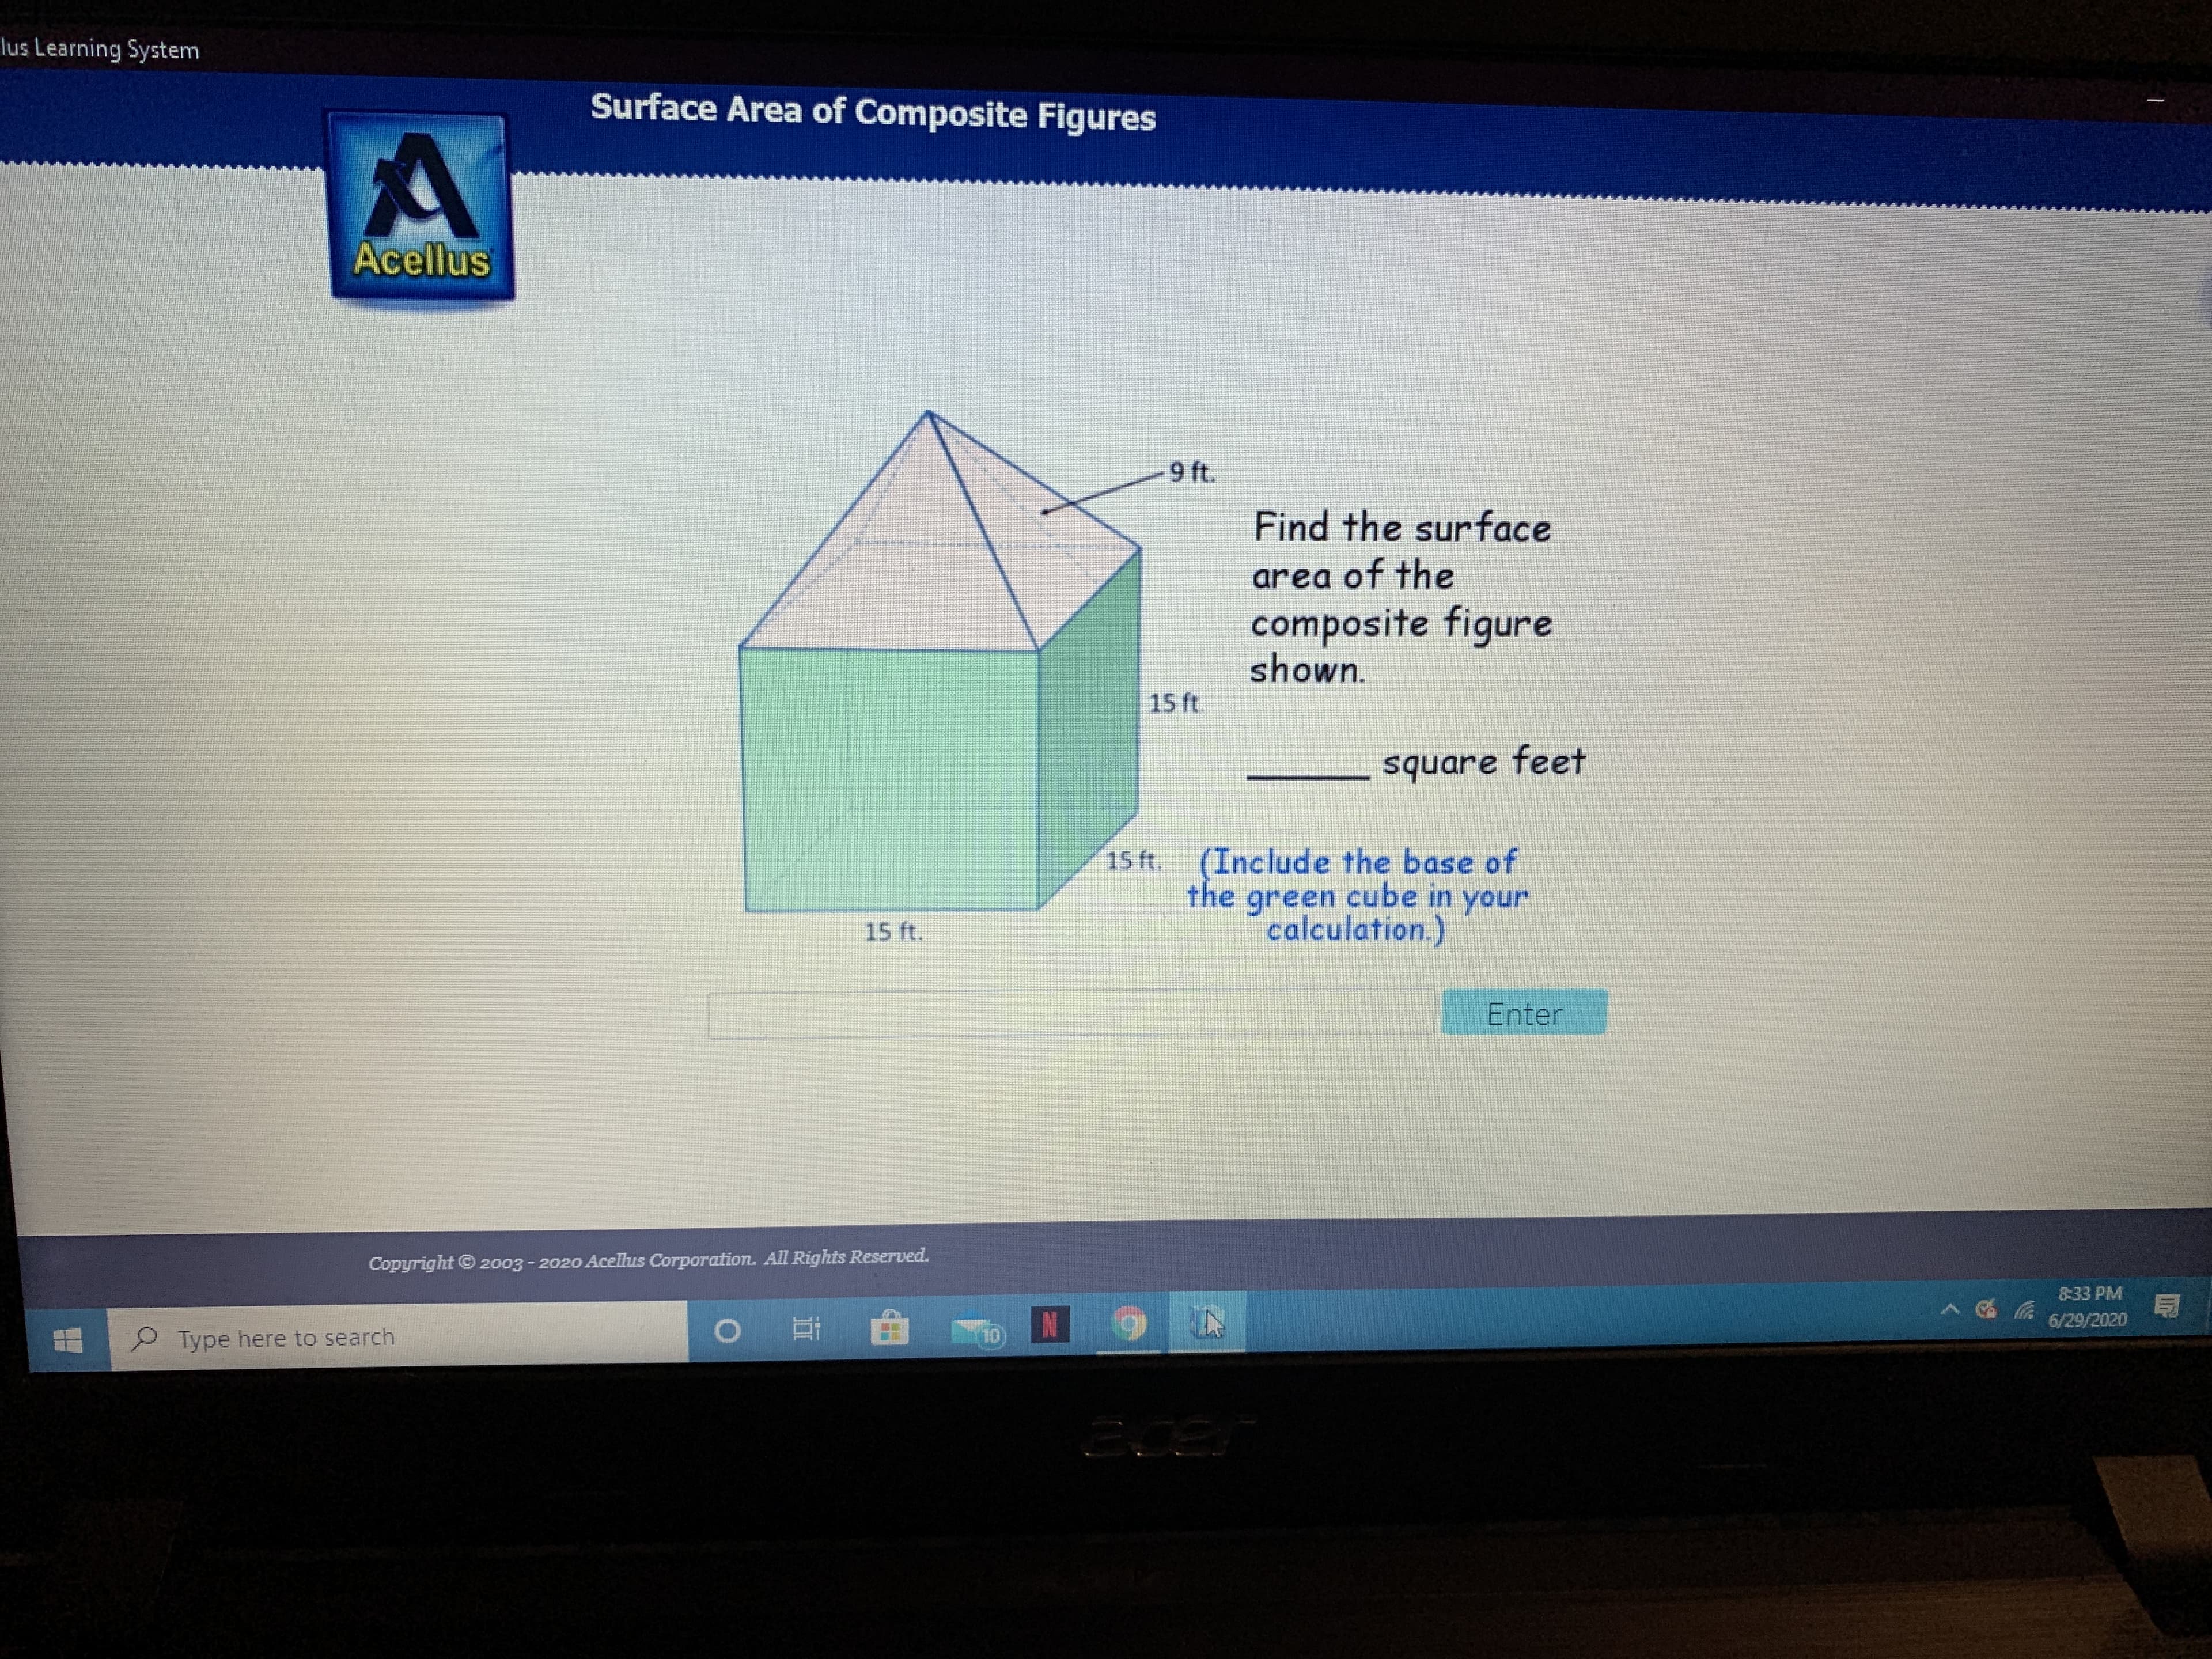 Find the surface
area of the
composite figure
shown.
square feet
